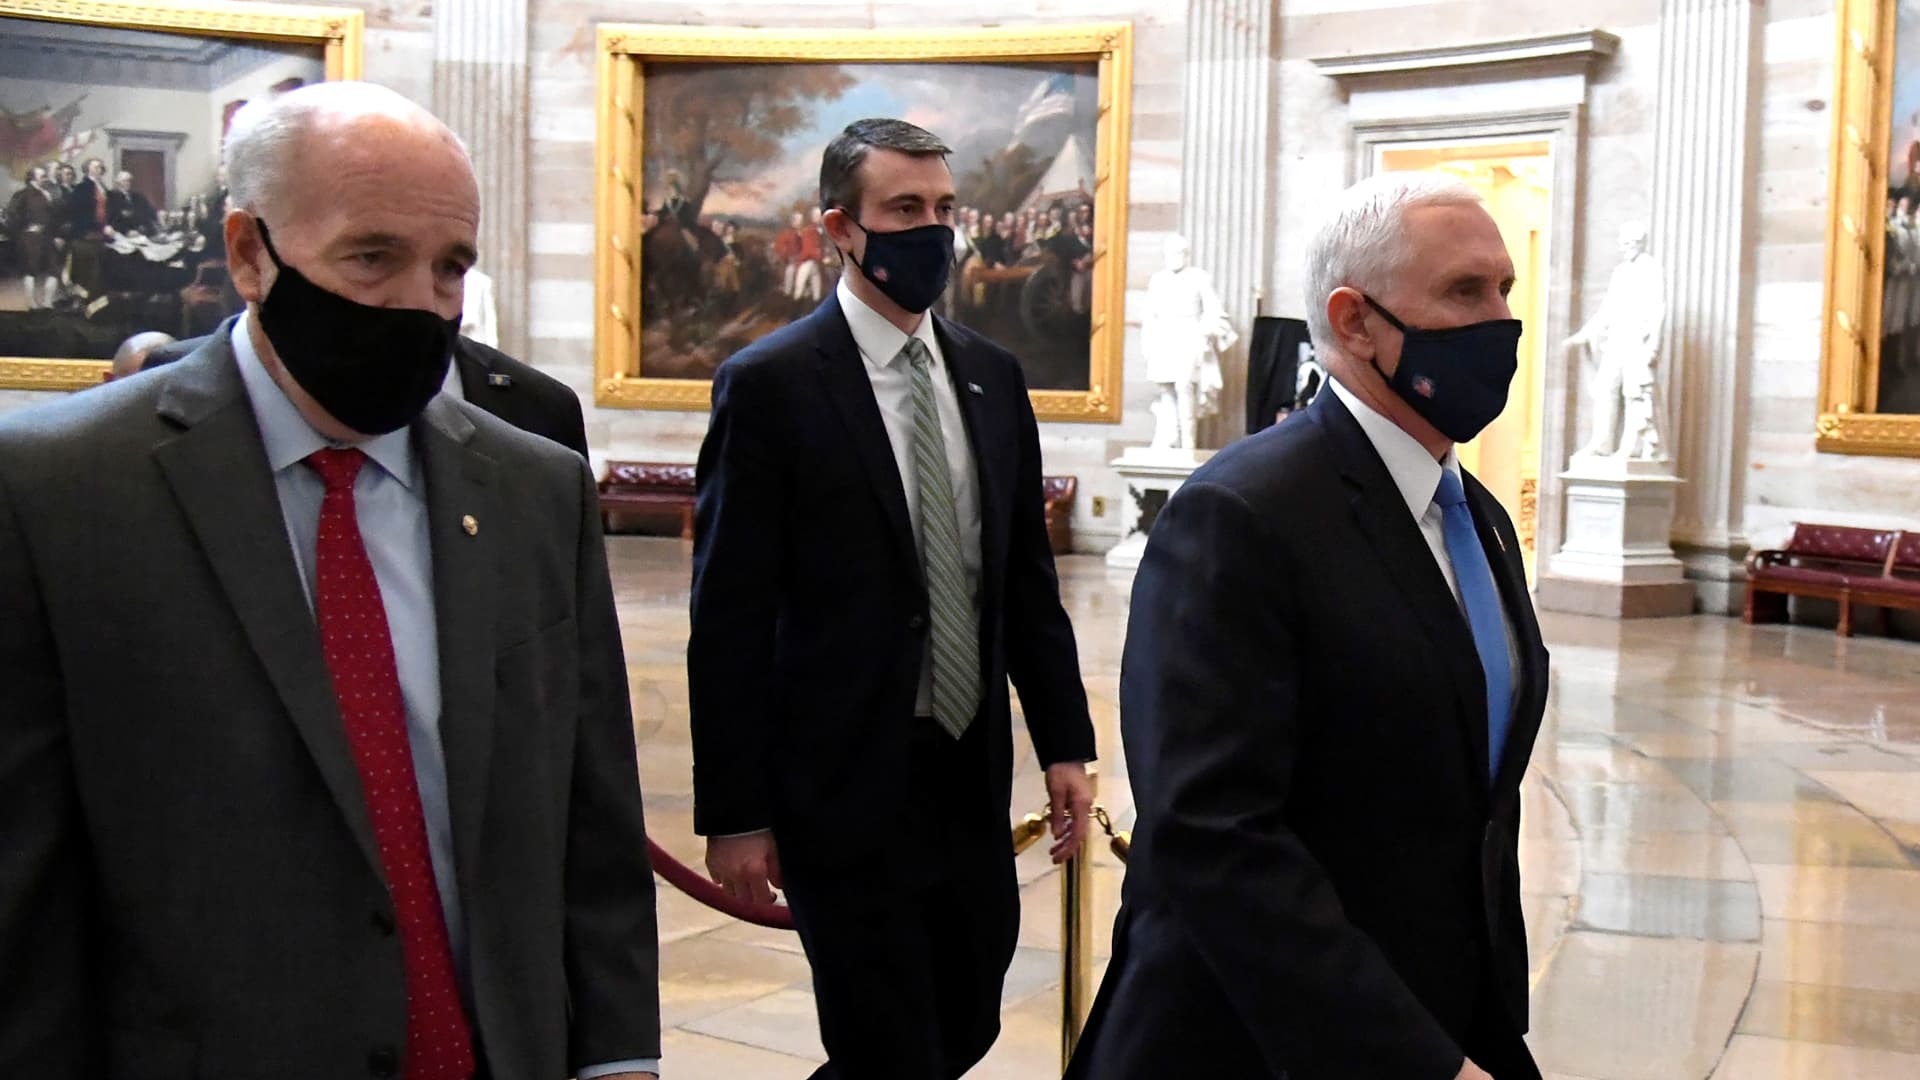 Vice President Mike Pence (R) is escorted by Sgt. at Arms Michael Stenger (L), from the House of Representatives to the Senate at the U.S. Capitol after a challenge was raised during the joint session to certify President-elect Joe Biden, in Washington, U.S., January 6, 2021.